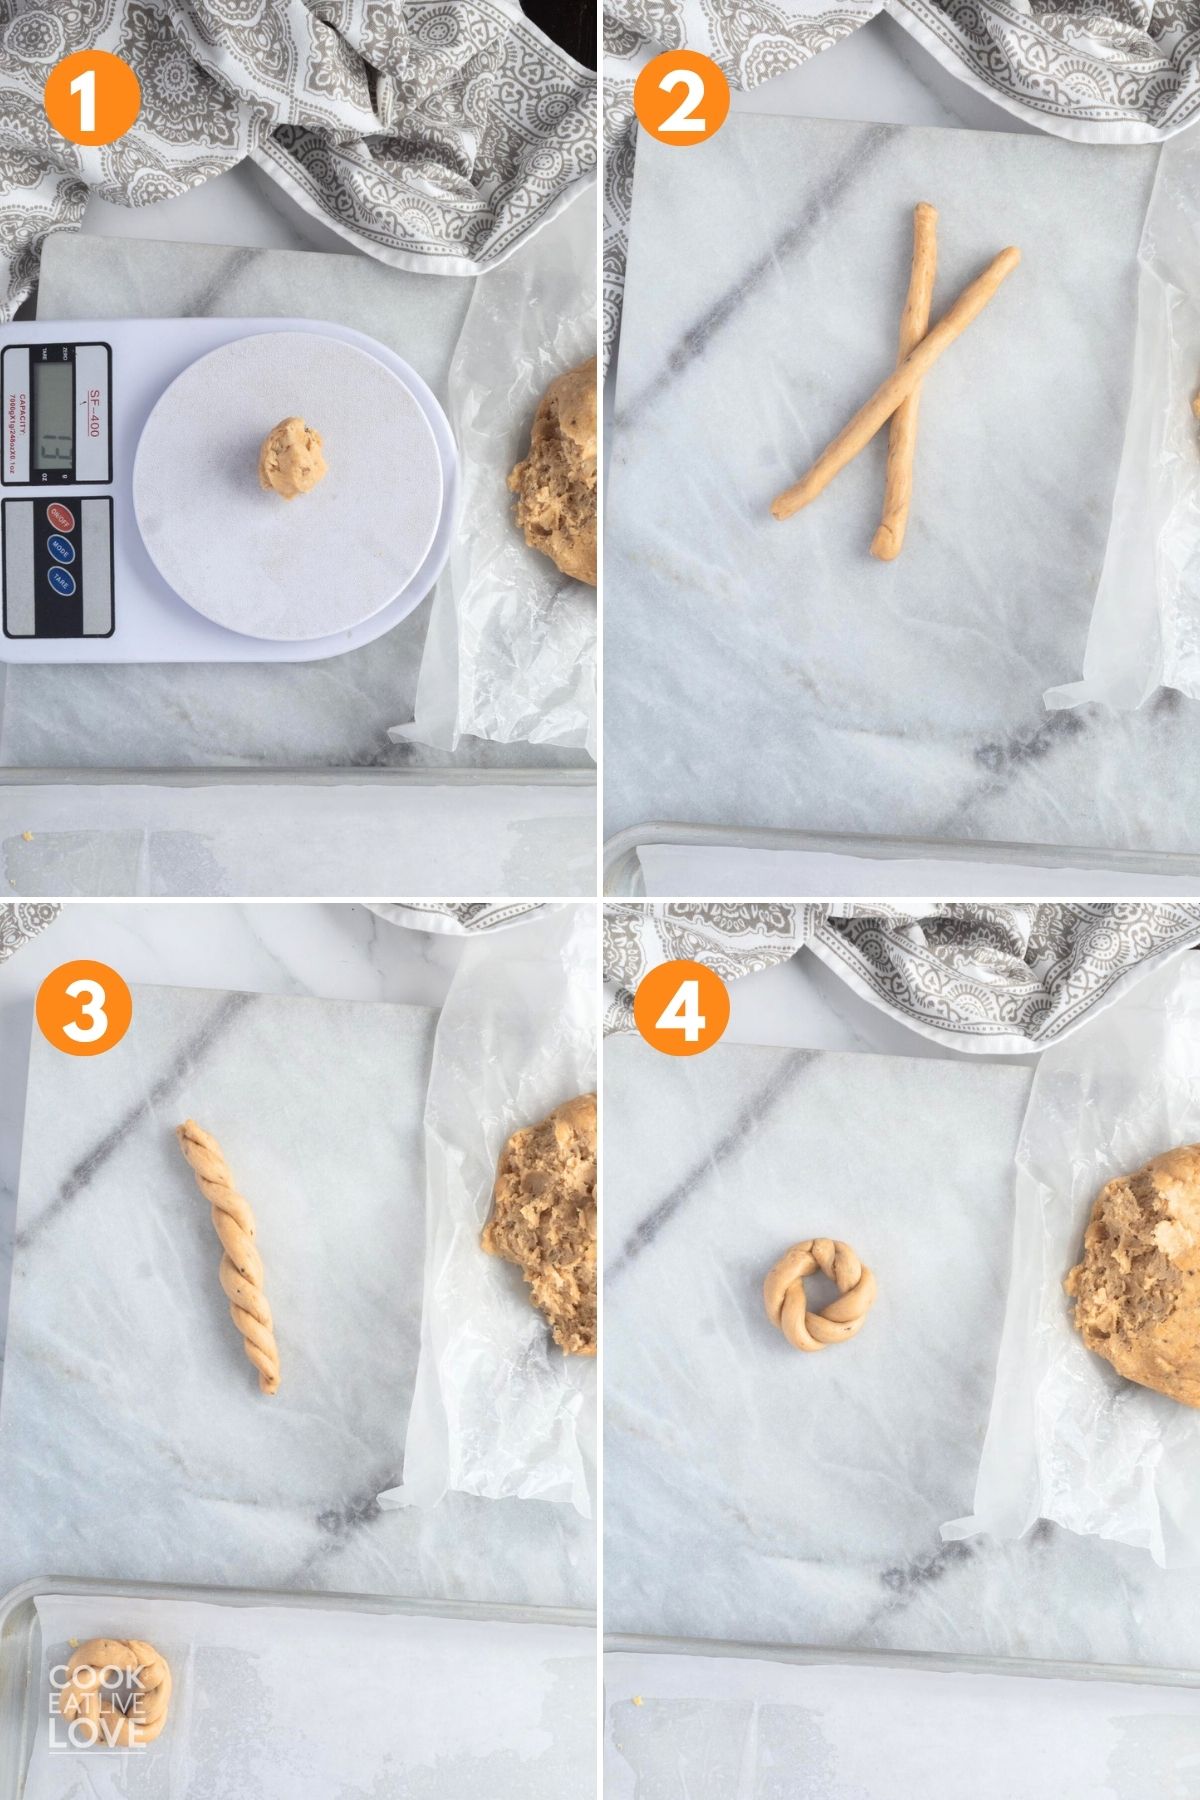 A collage showing how to shape and twist the anise cookies.